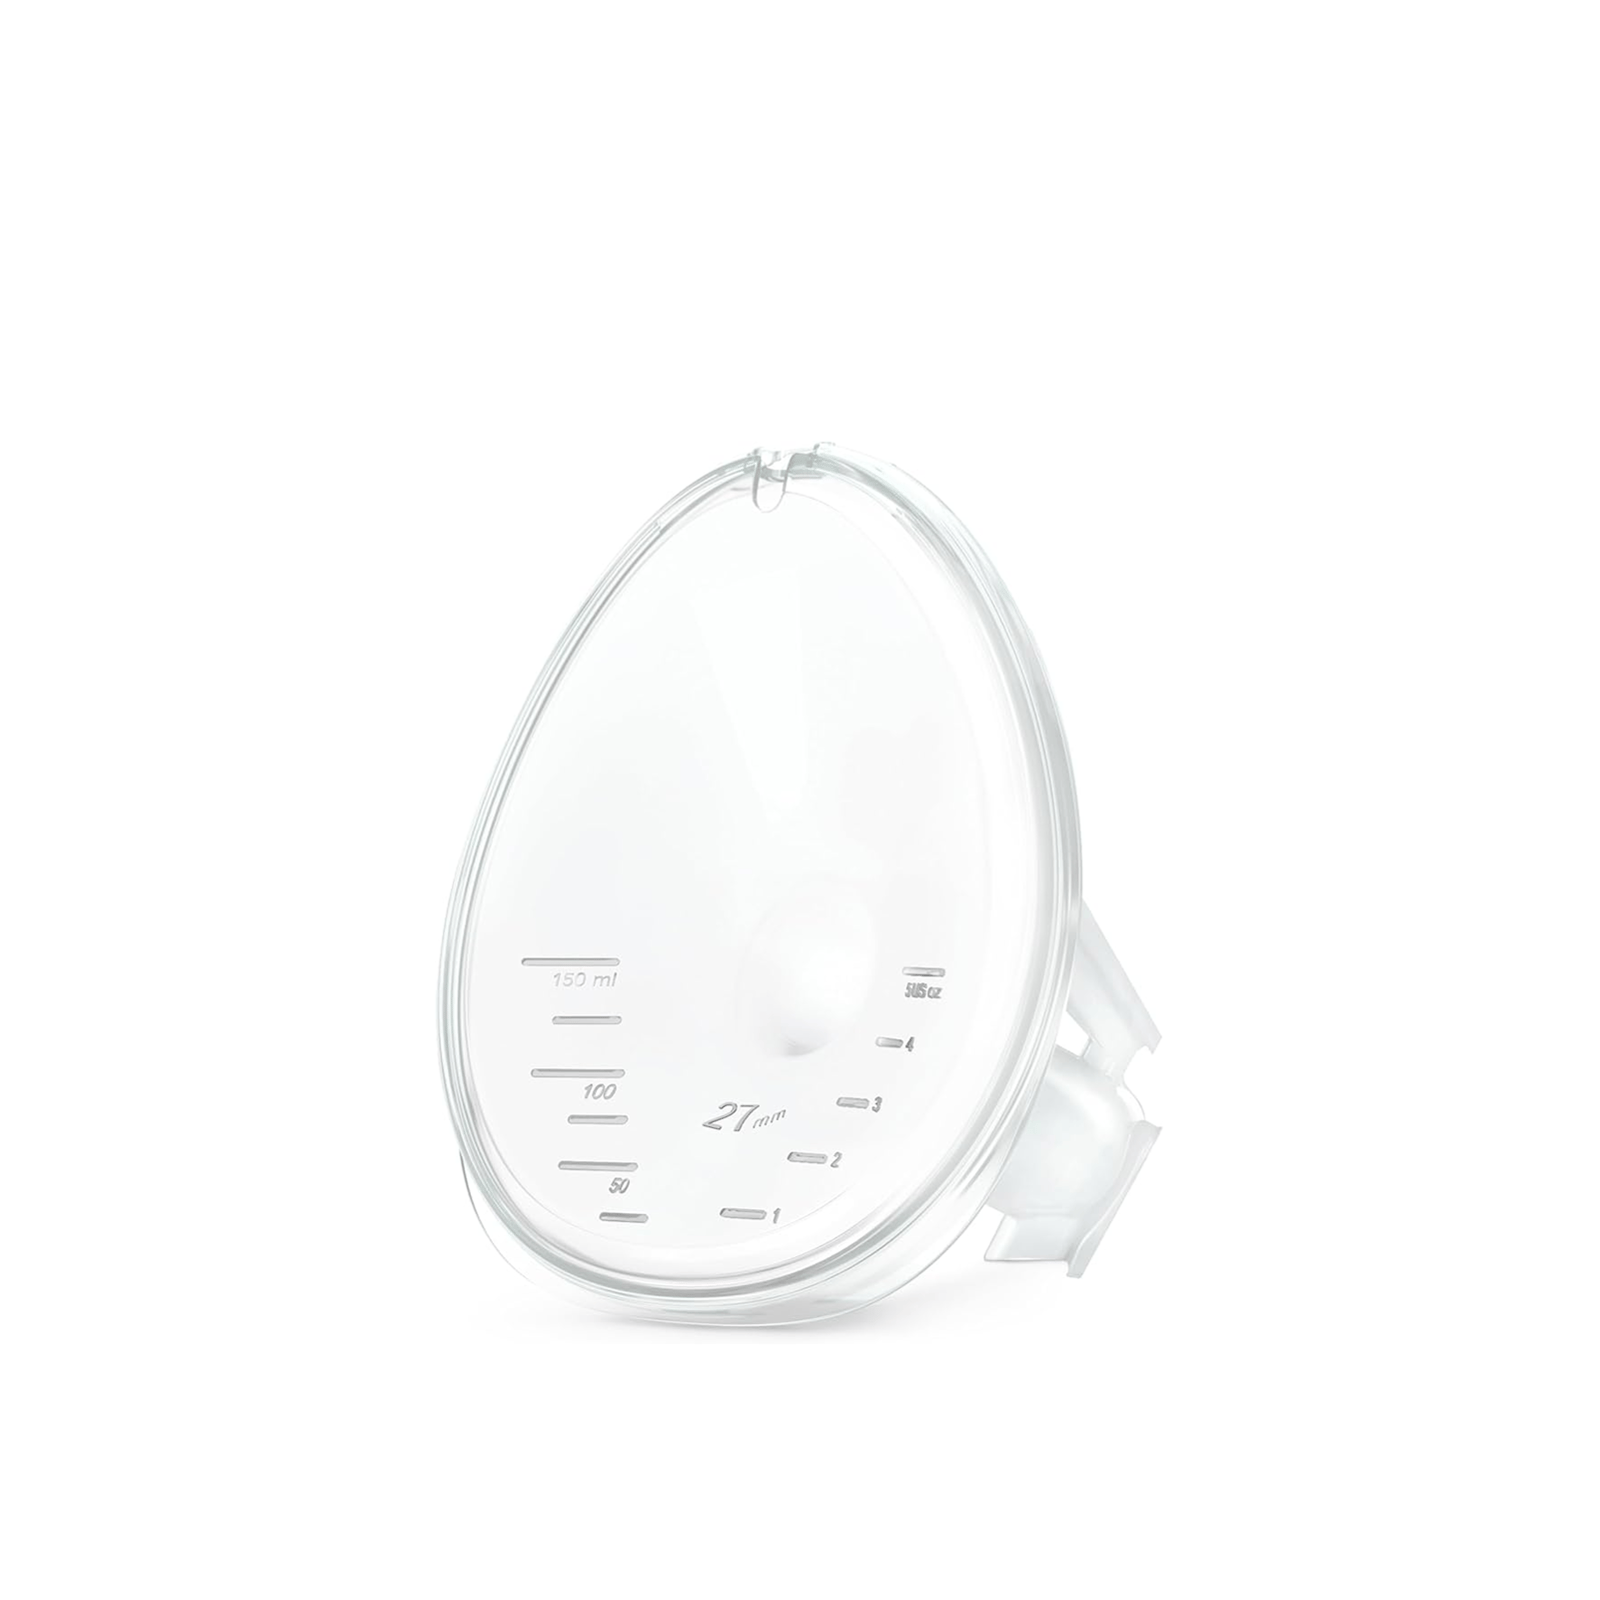 https://static.beautytocare.com/cdn-cgi/image/width=1600,height=1600,f=auto/media/catalog/product//m/e/medela-hands-free-breast-shields-large-size-x2.png